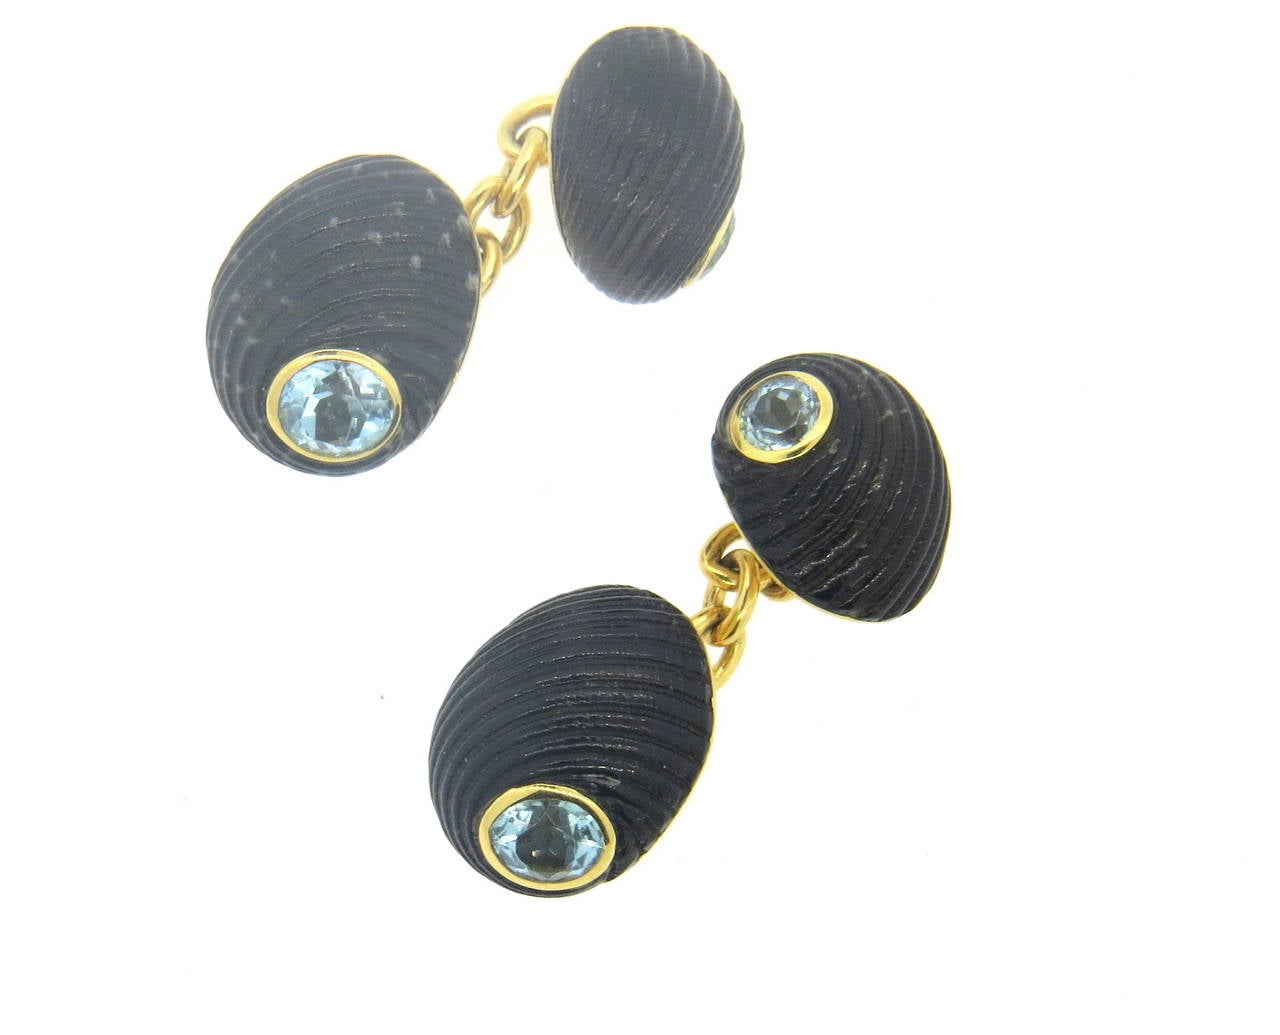 Pair of new 18k yellow gold cufflinks, crafted by Trianon, decorated with shell top and aquamarine gemstones in the center. Top measures 15mm x 13mm, back - 12mm x 10mm. Marked with Trianon mark, 750, Trianon. Weight - 8.2 grams
Retail $4000